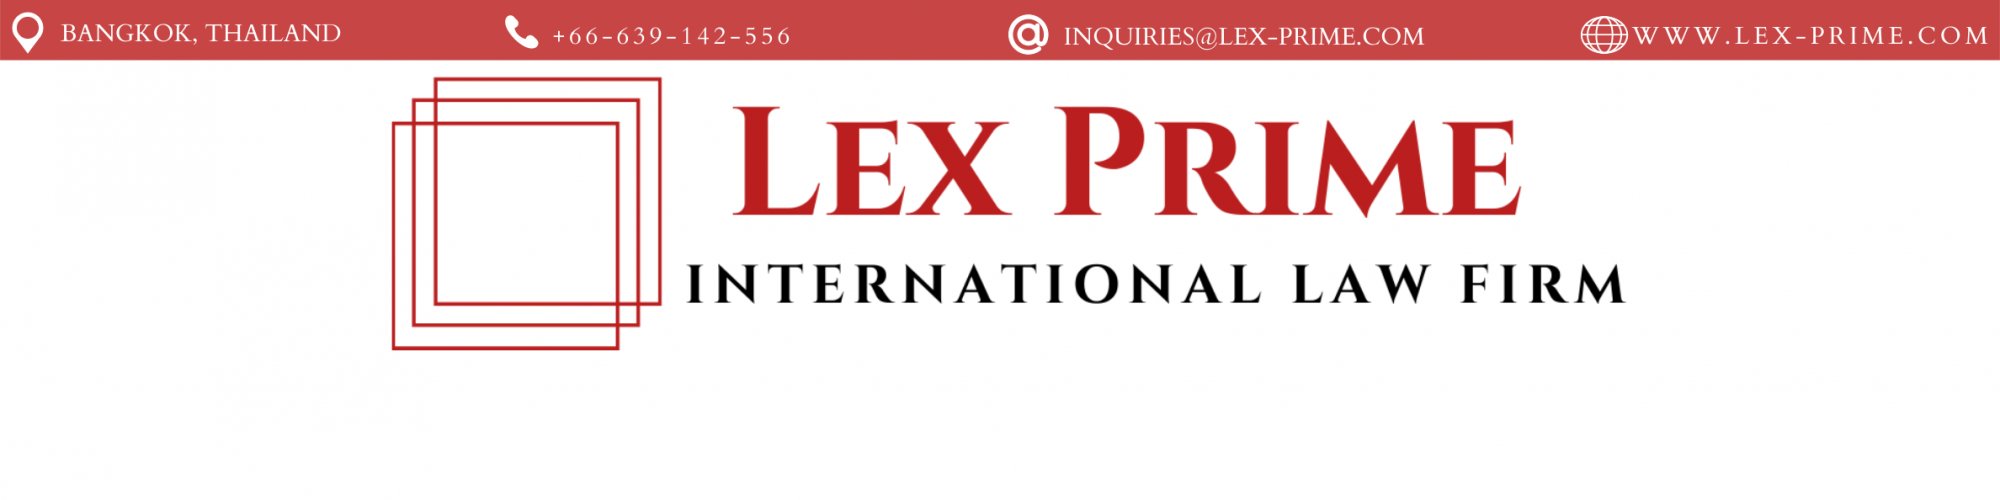 Lex Prime International Law Firm cover photo